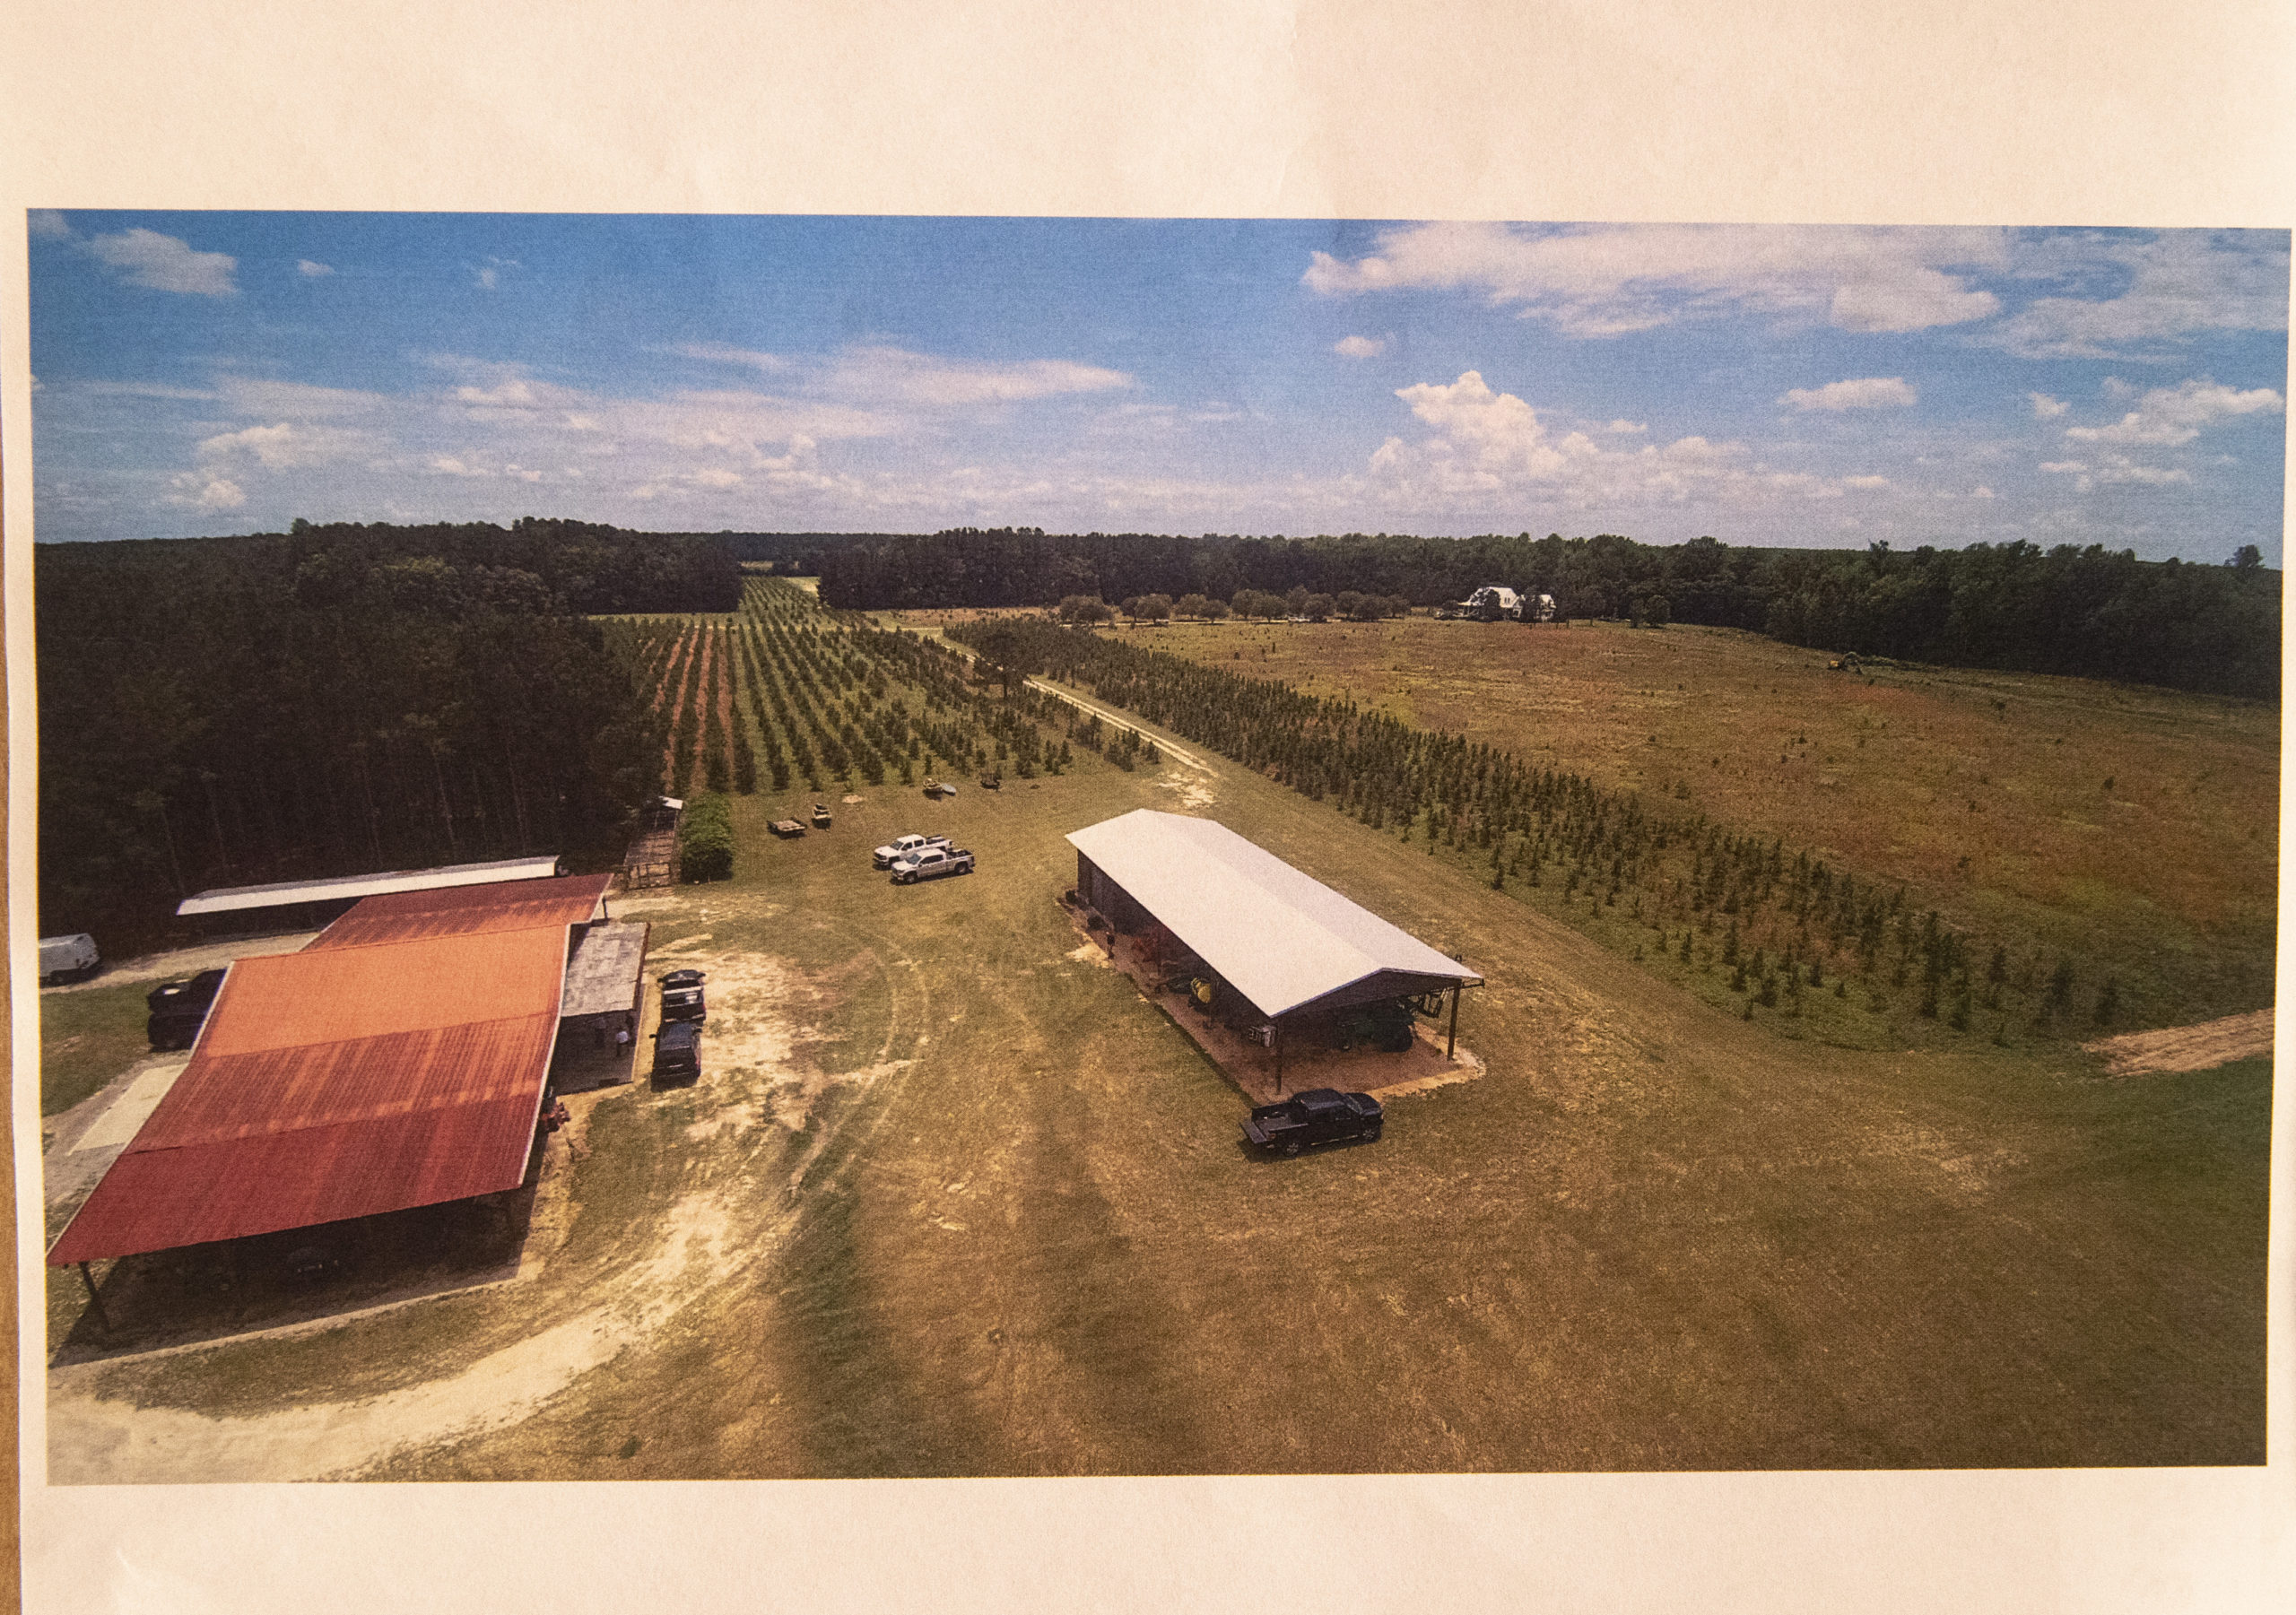 This photo of Alex Murdaugh's property in South Carolina - and the scene of the crime - was used as evidence during Murdaugh's murder trial in Walterboro.